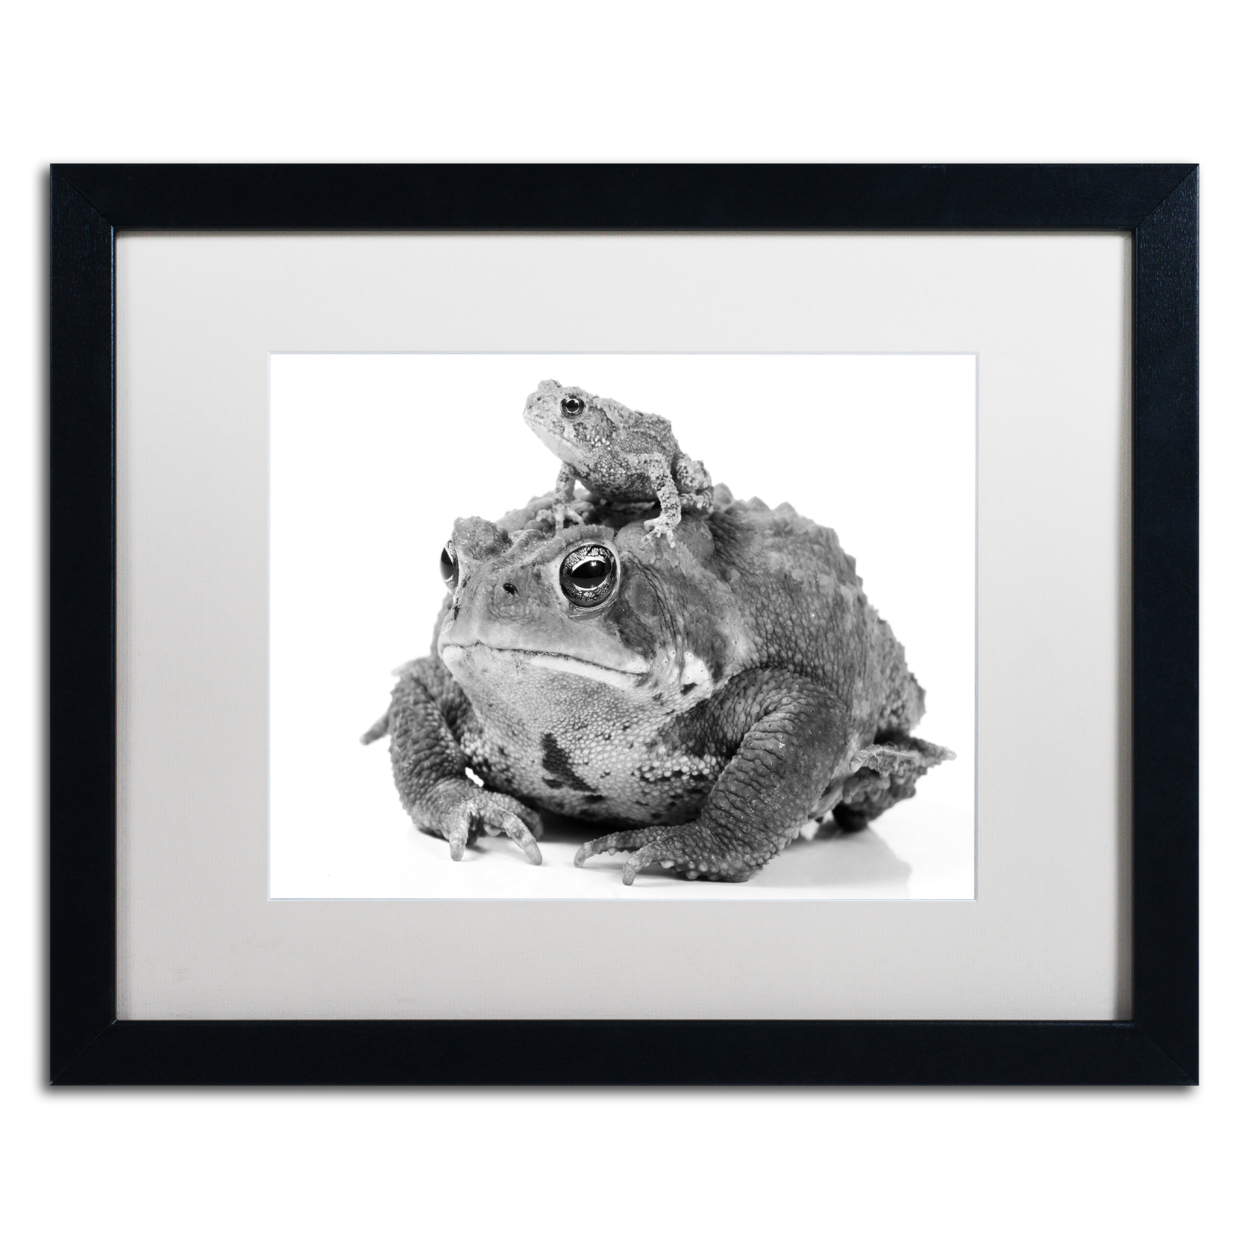 Jason Shaffer 'Two Toads' Black Wooden Framed Art 18 X 22 Inches